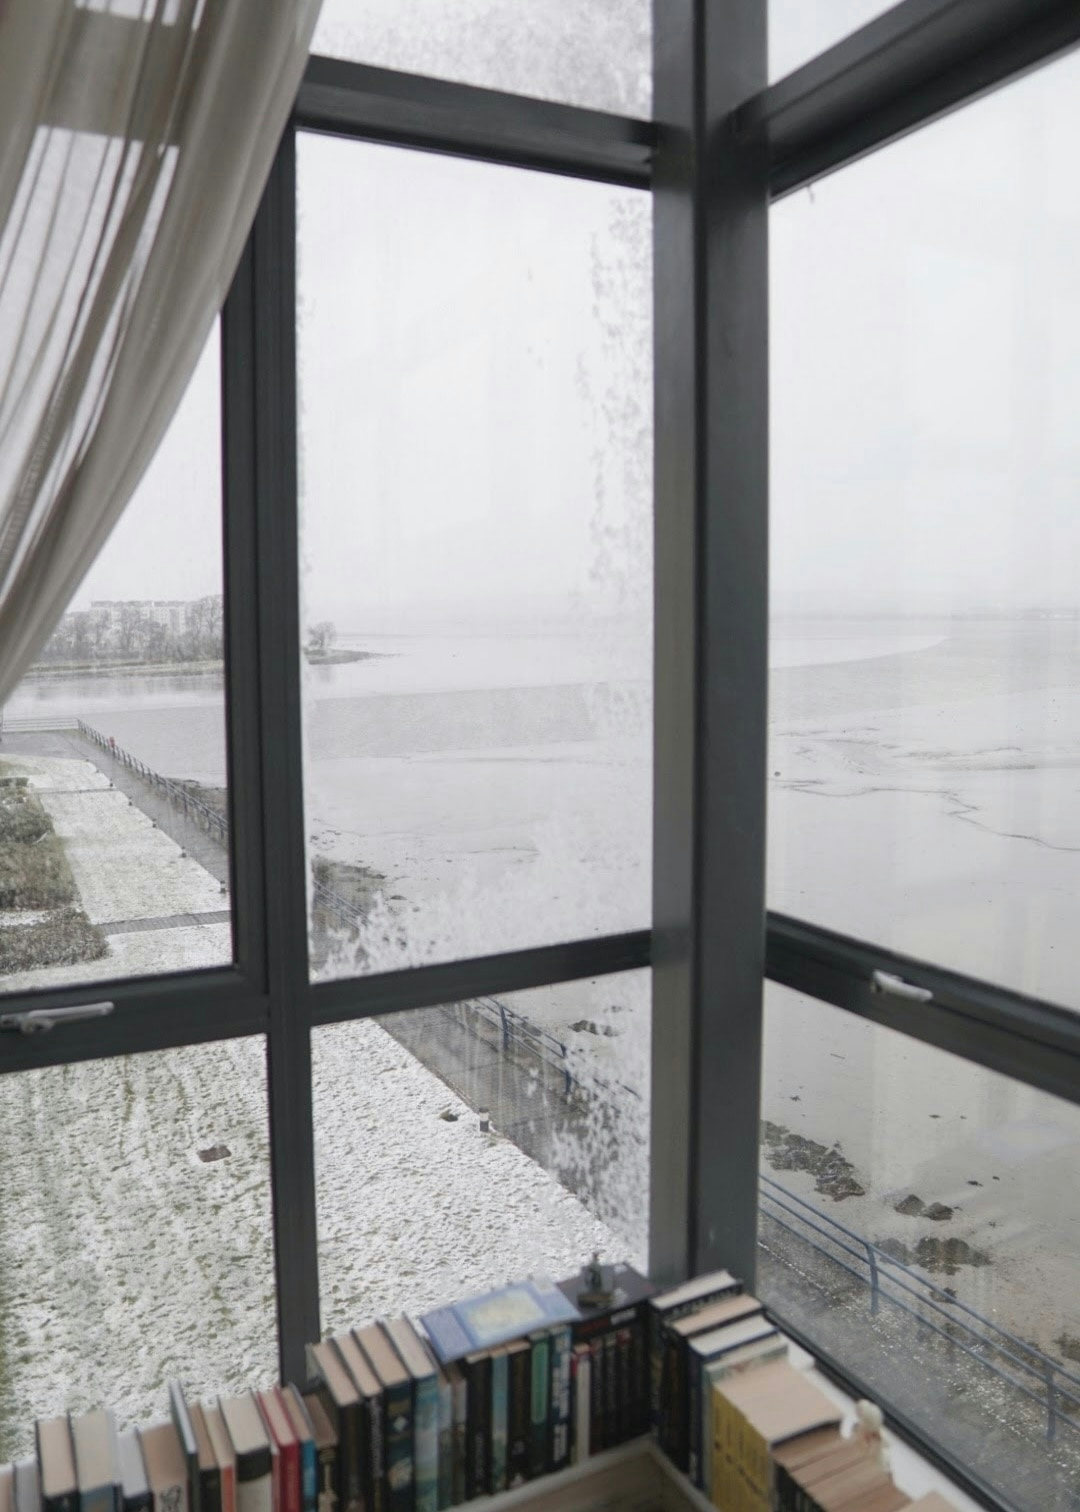 View from an apartment window, over an estuary covered in snow